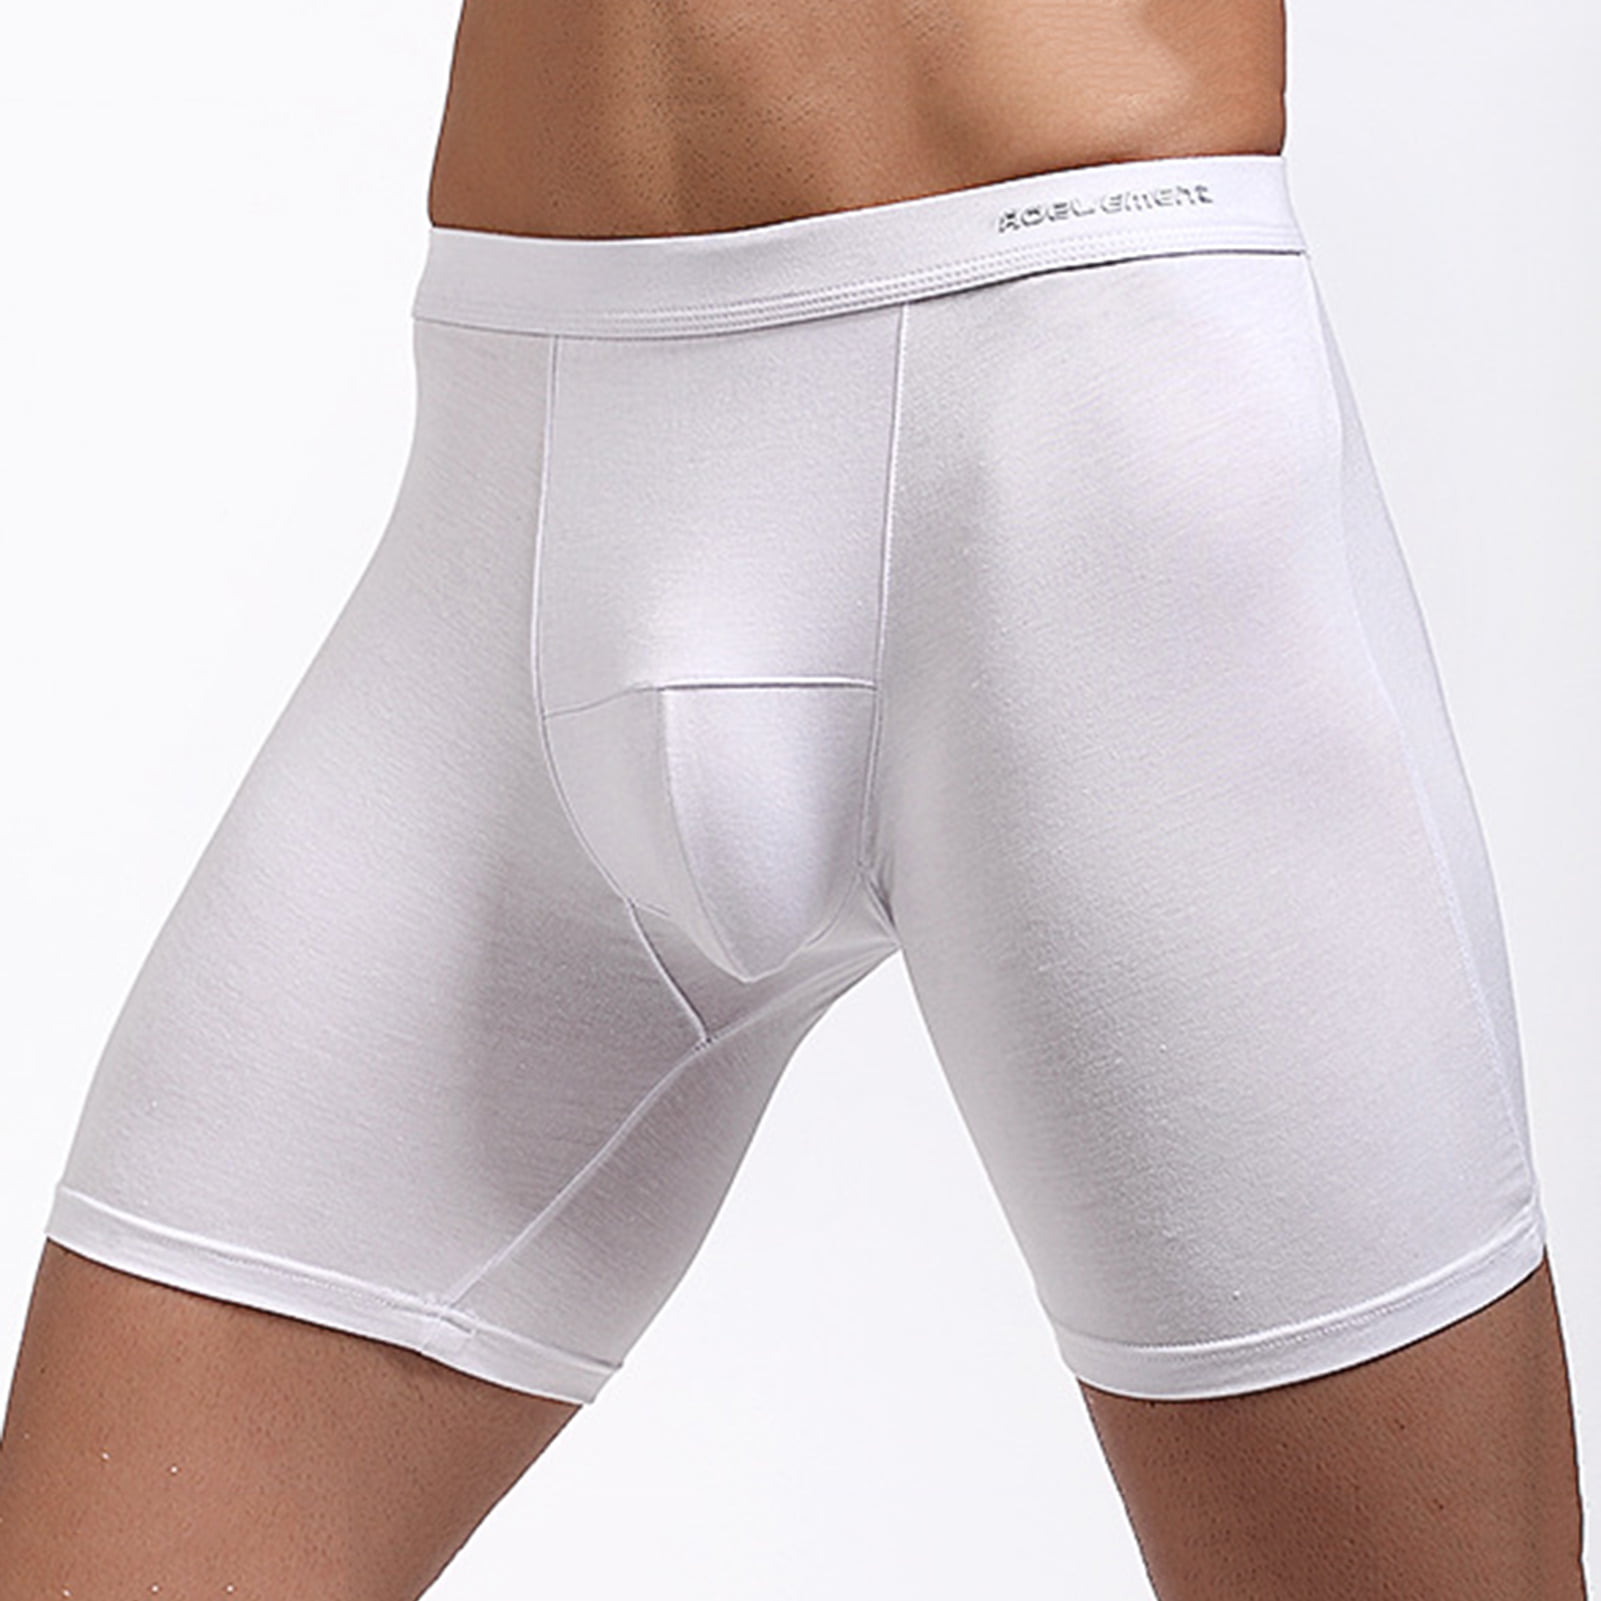 Breathable 100% Cotton Mens Briefs Mid Waist Triangle Underwear With Letter  Wavelength Comfortable Panty Shorts 210730 From Dou01, $13.73